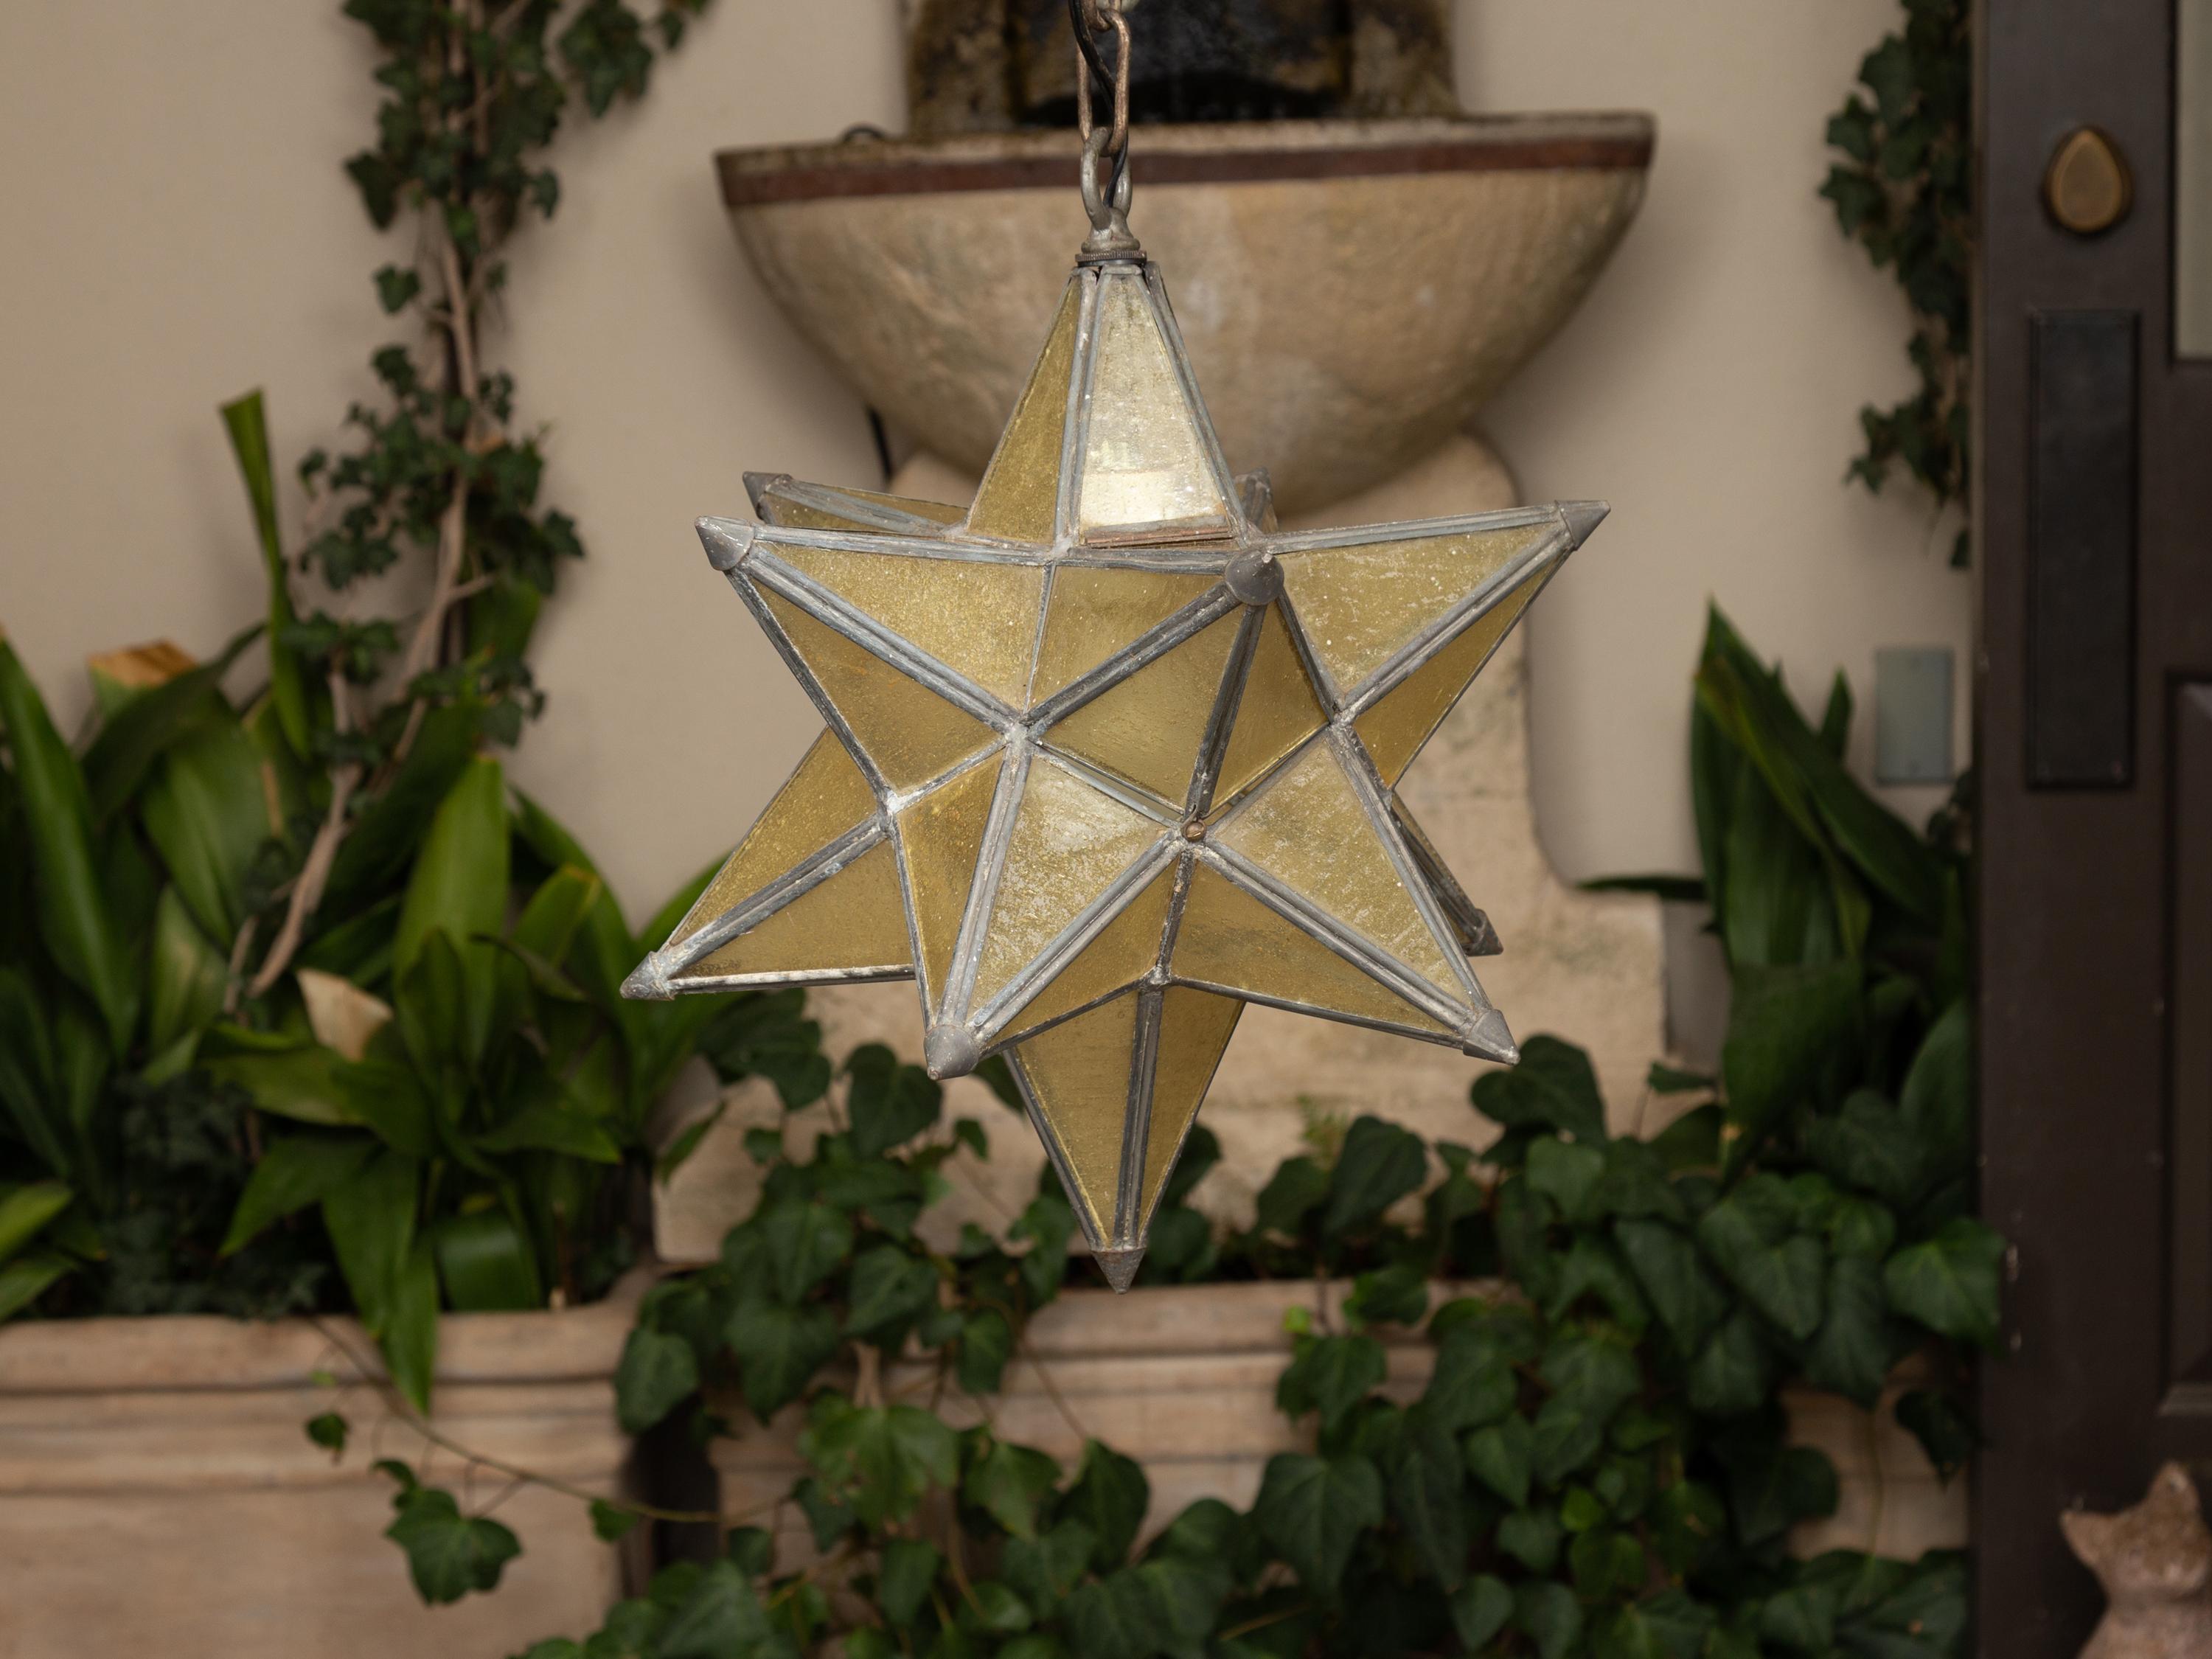 A vintage French Art Deco period star light fixture from the first half of the 20th century, with metal frame and light gold-colored glass panels. Born in France during the second quarter of the 20th century, this small French light fixture features